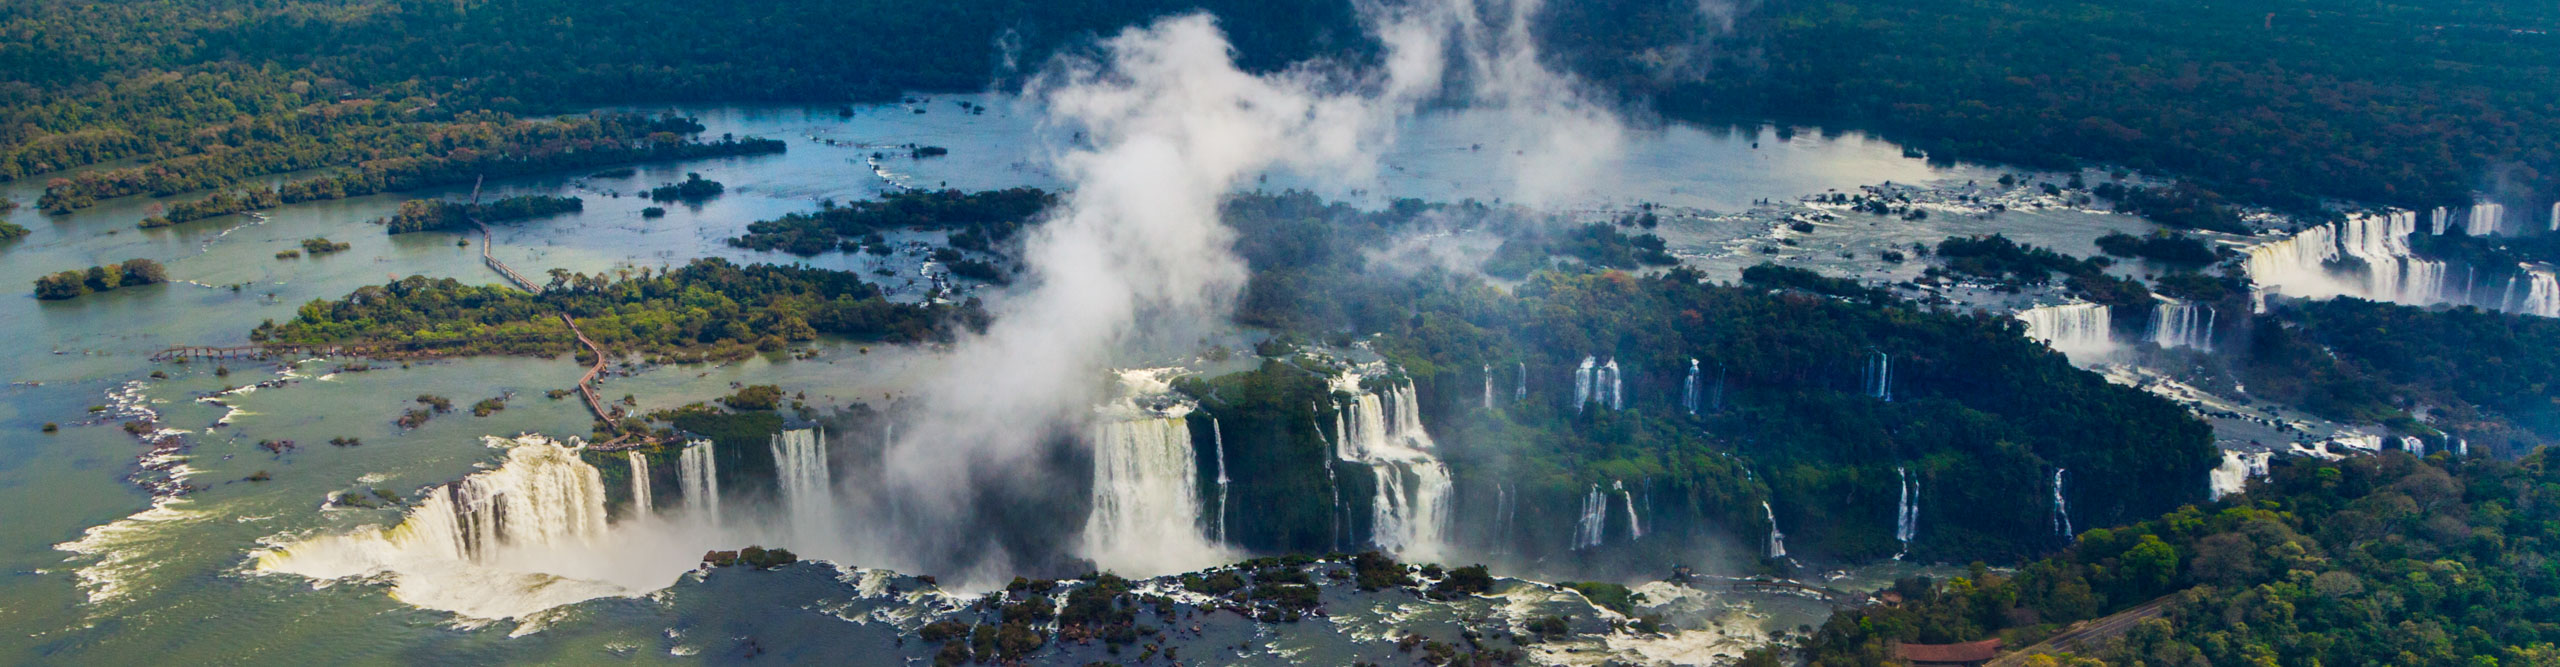 Aerial view of Iguazu Falls, with mist in the air in the Iguazu National Park, Paraguay